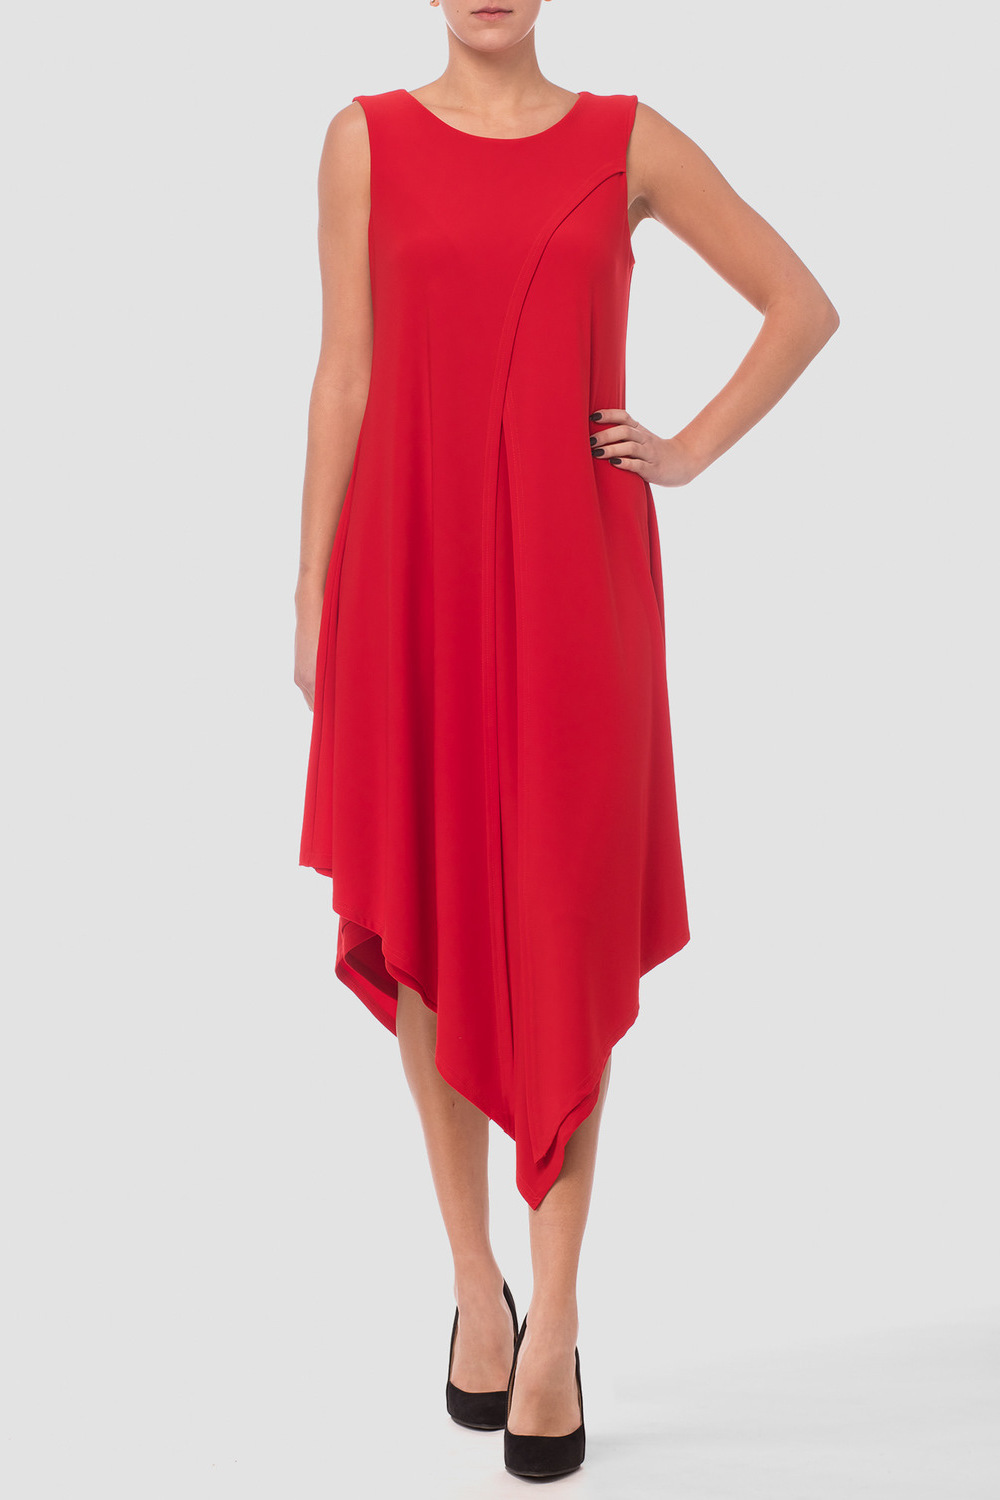 Joseph Ribkoff robe style 181044. Rouge A Levres 173